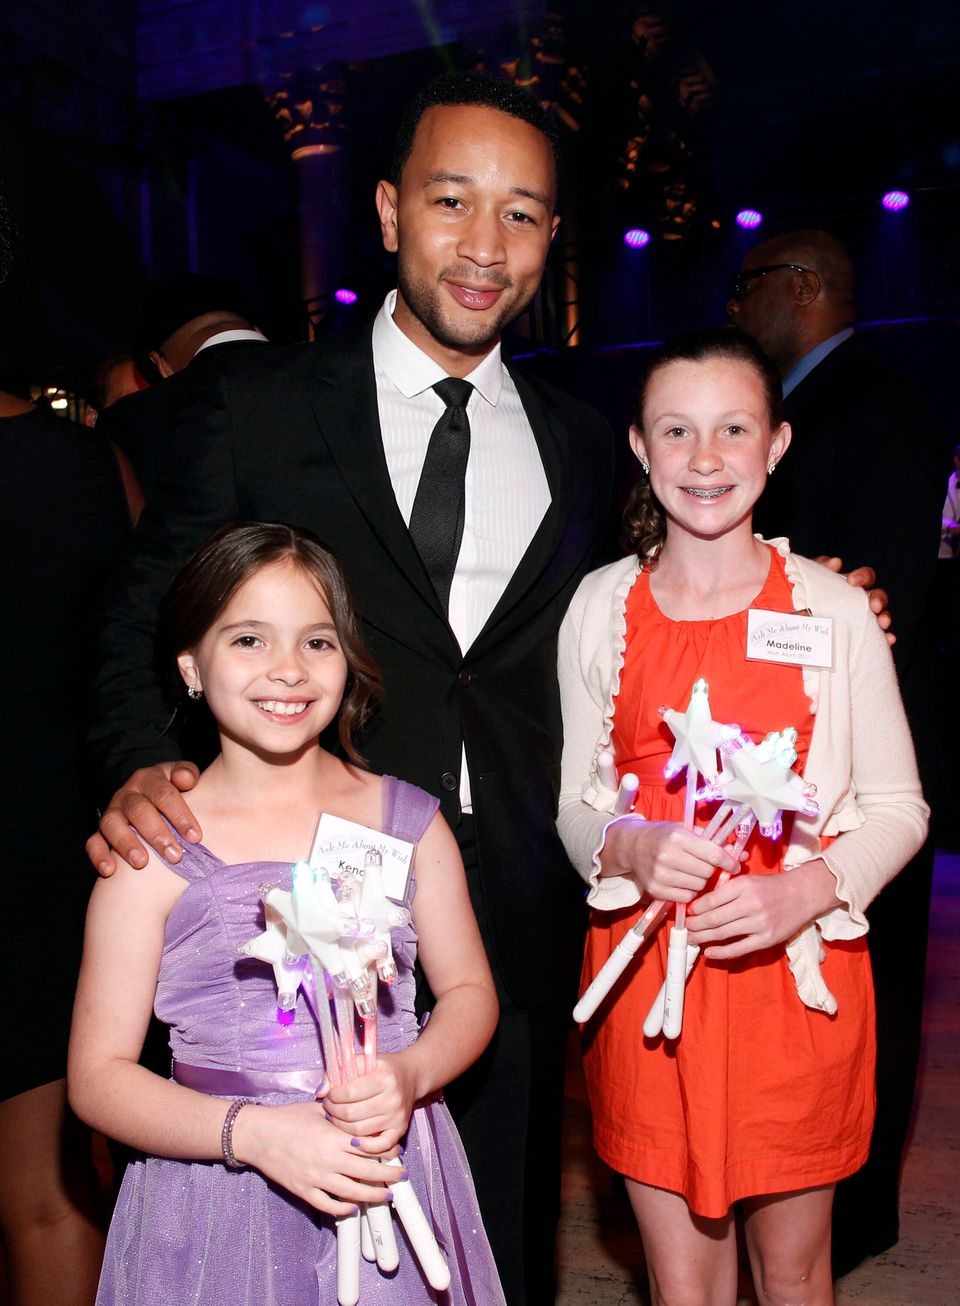 "An Evening Of Wishes", Make-A-Wish Metro New York's 30th Anniversary Gala